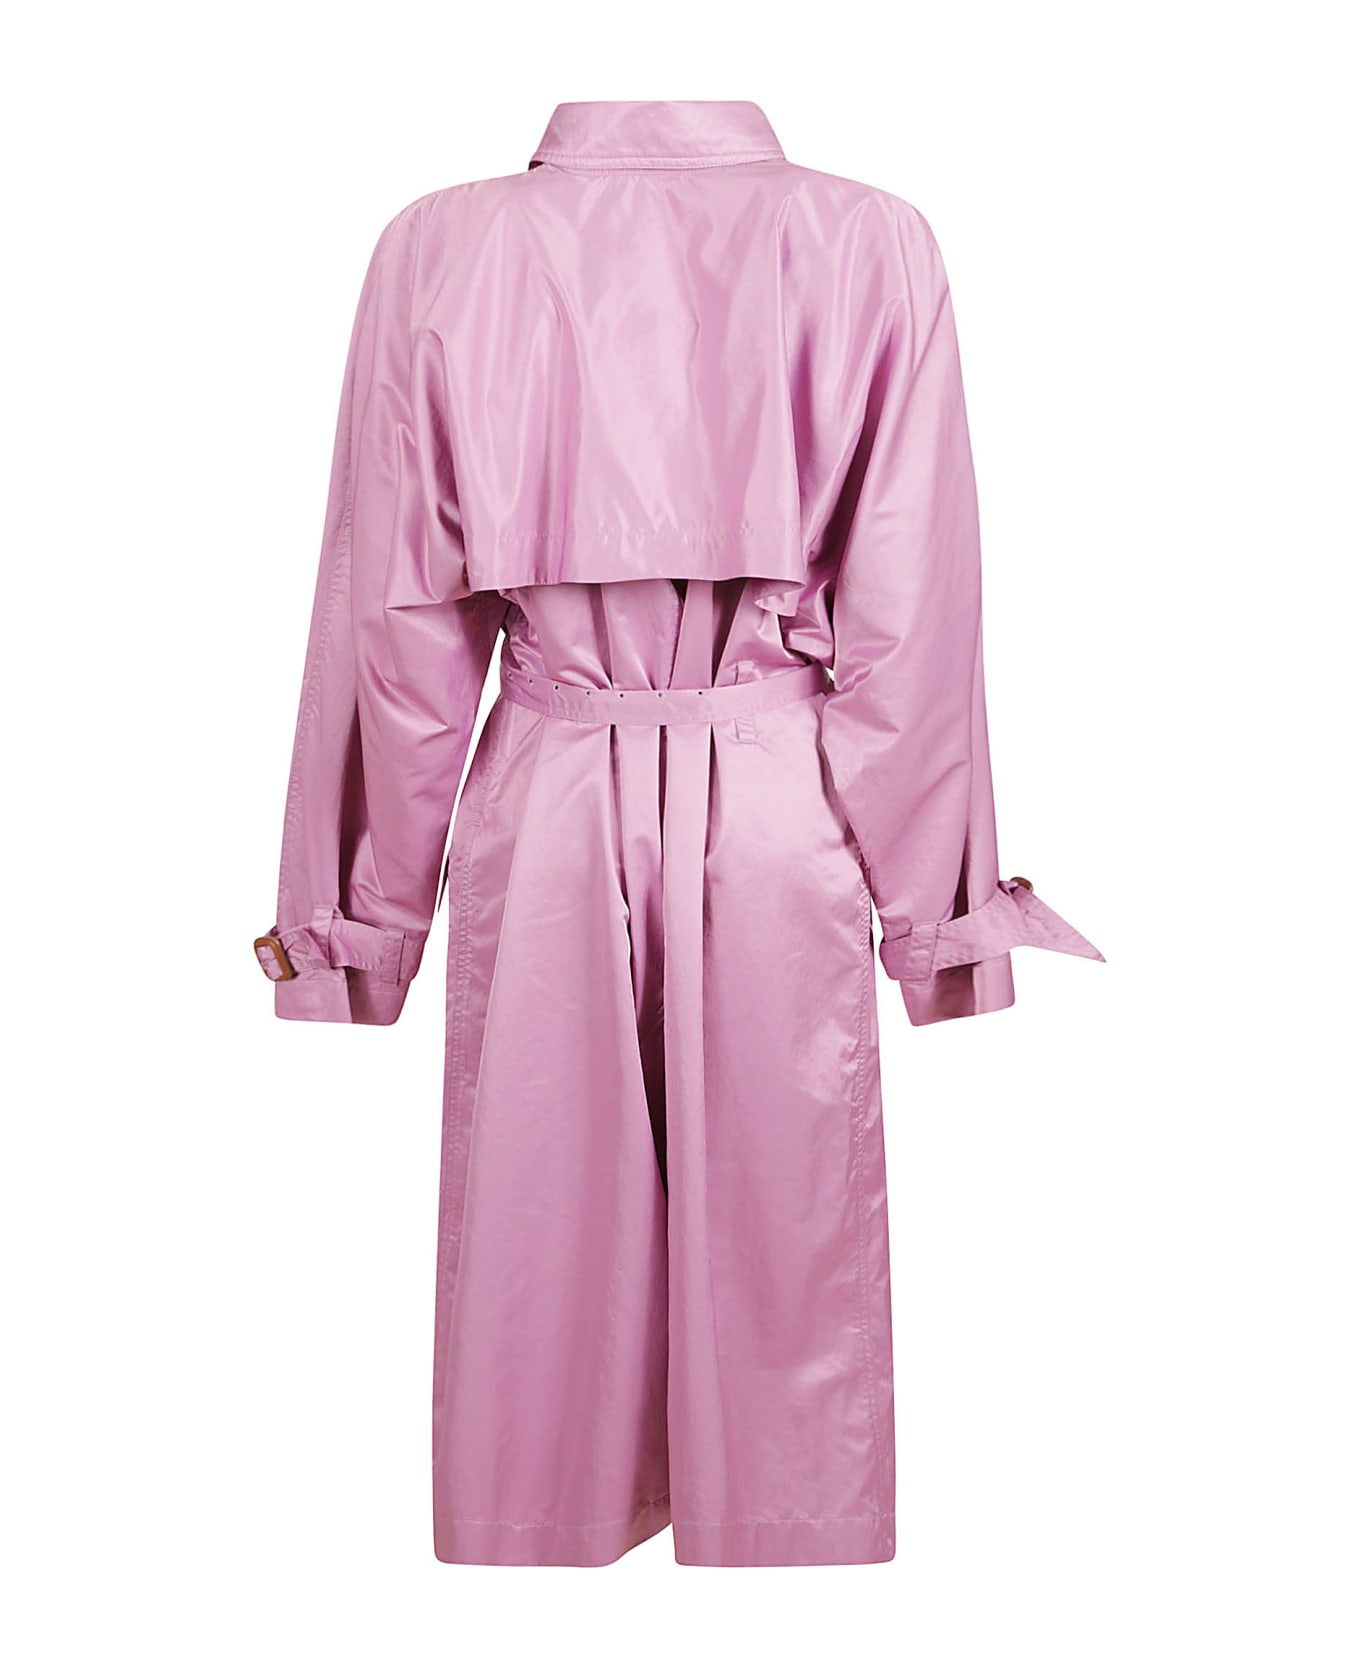 Isabel Marant Lilac Polyester Blend Oversize Edenna Trench Coat - Lilac